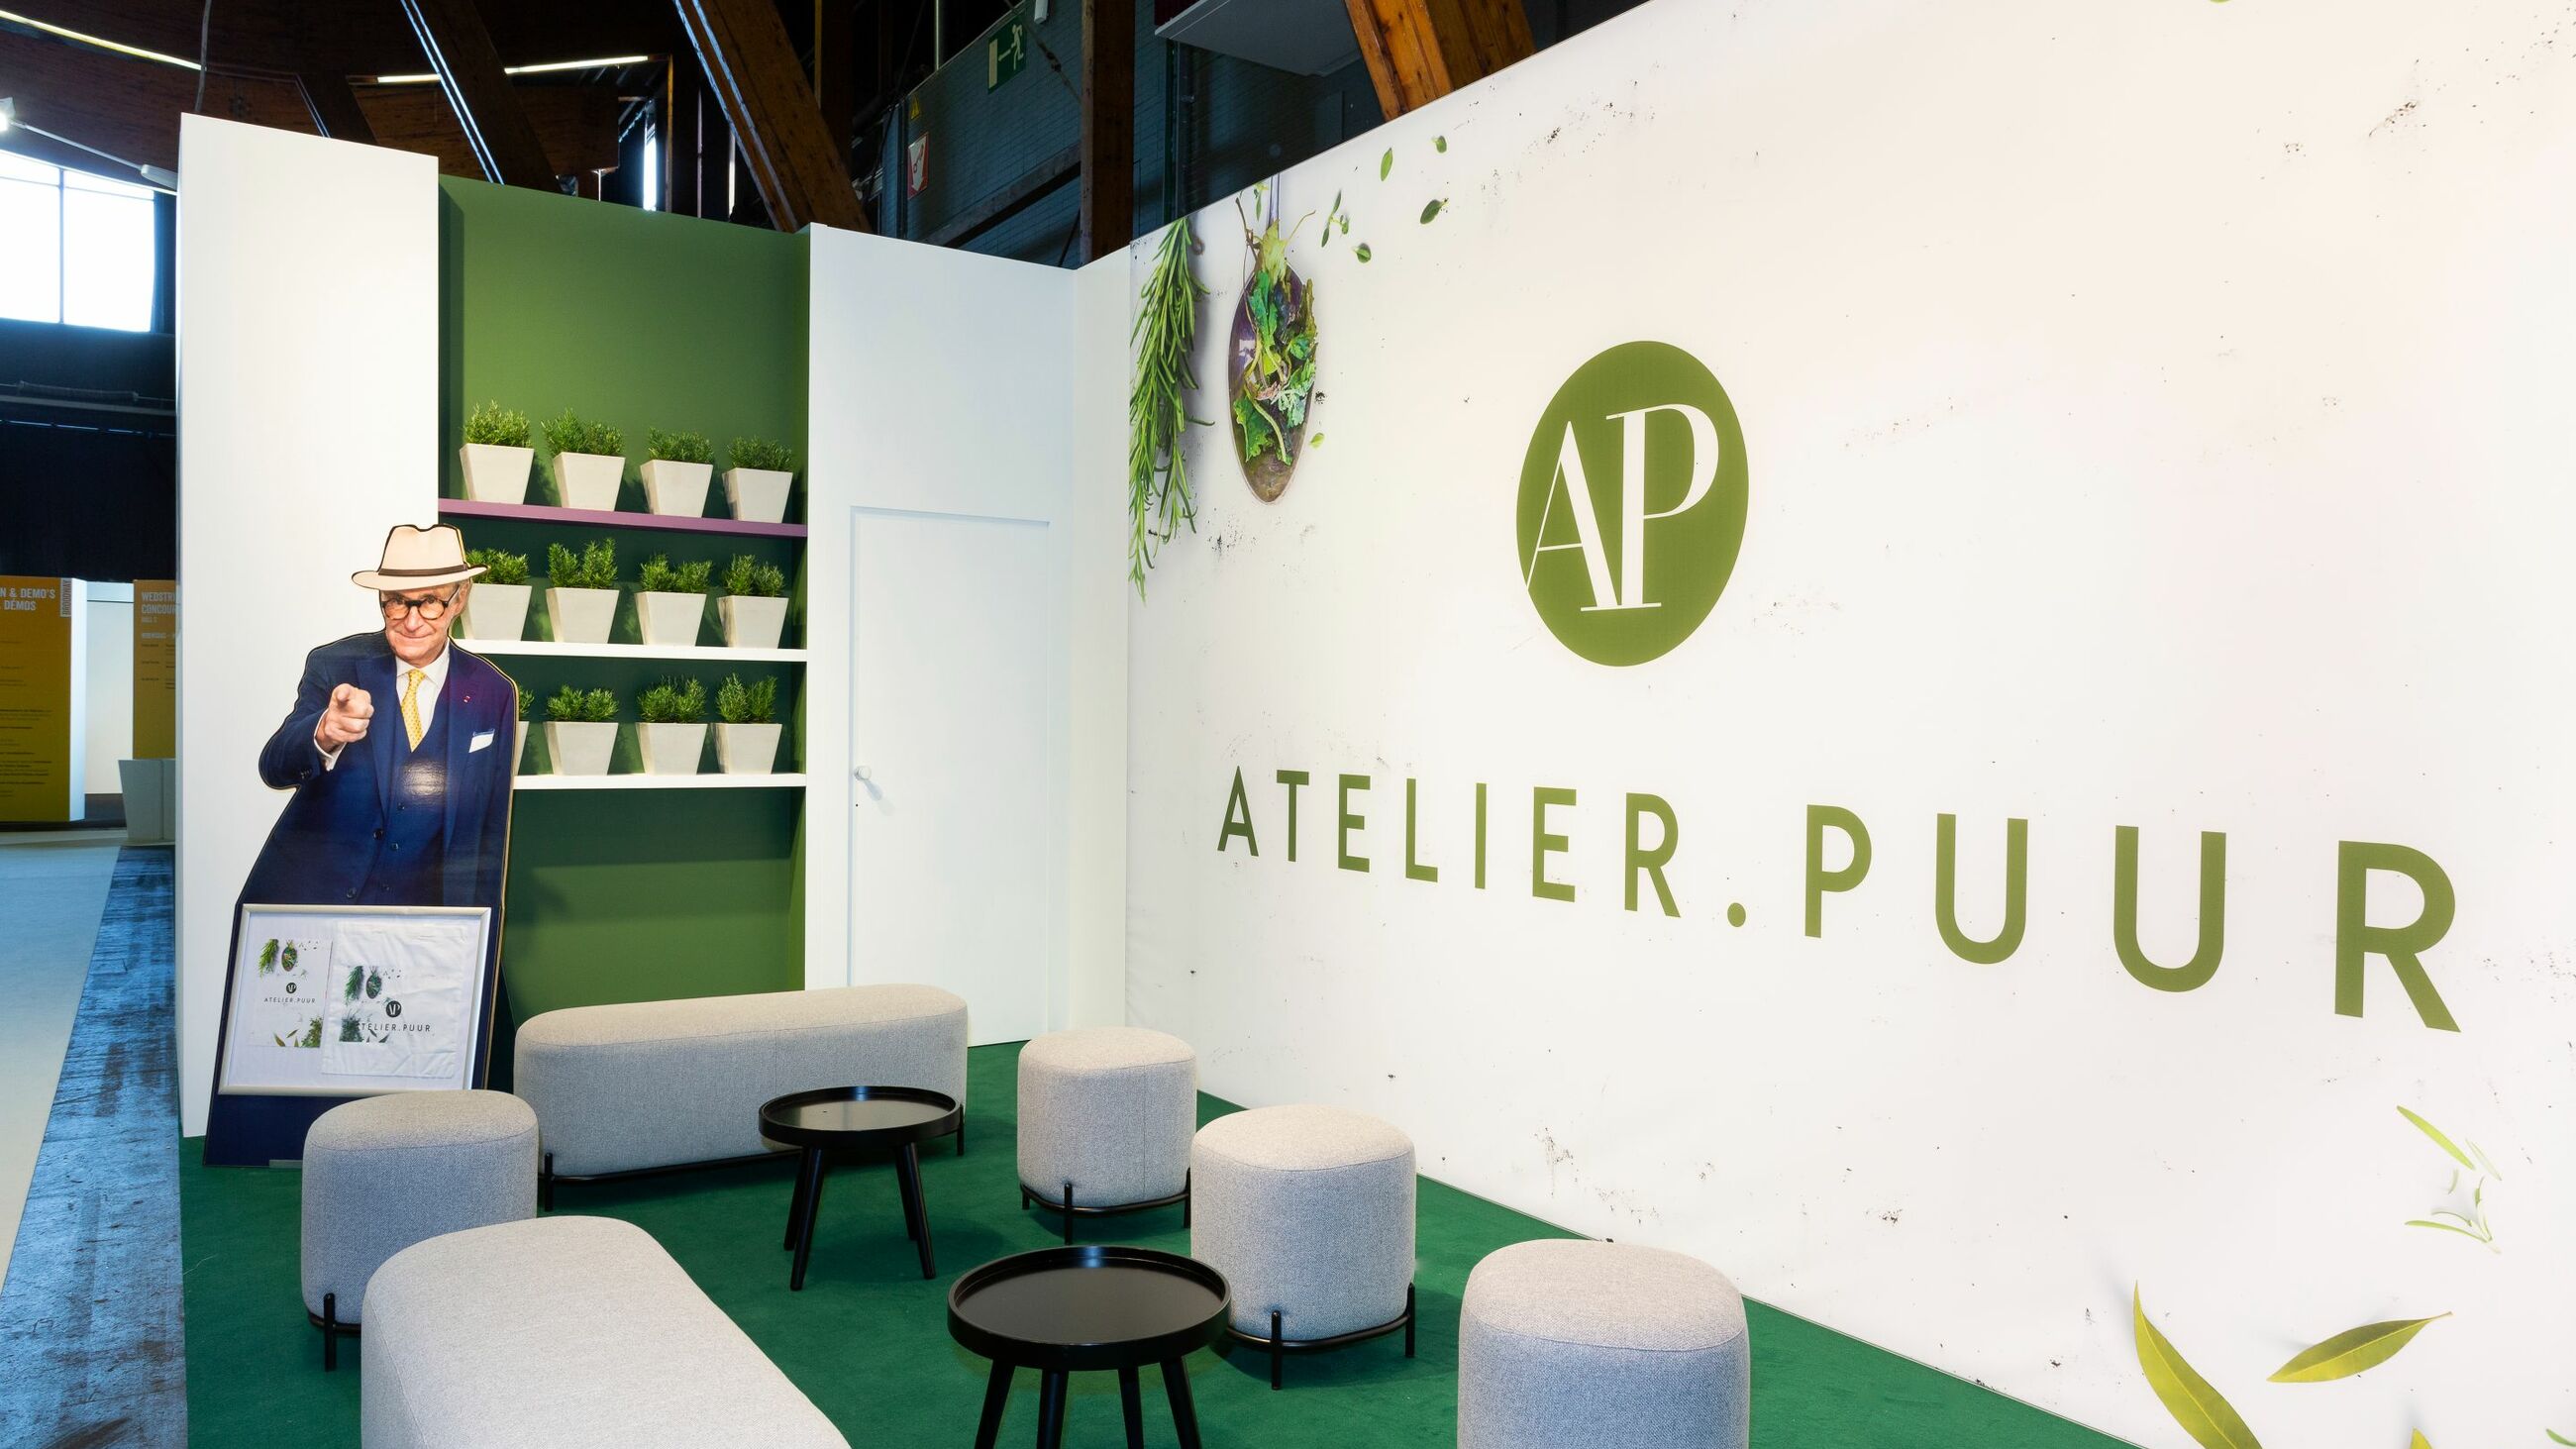 Atelier Puur - Broodway/Meatexpo